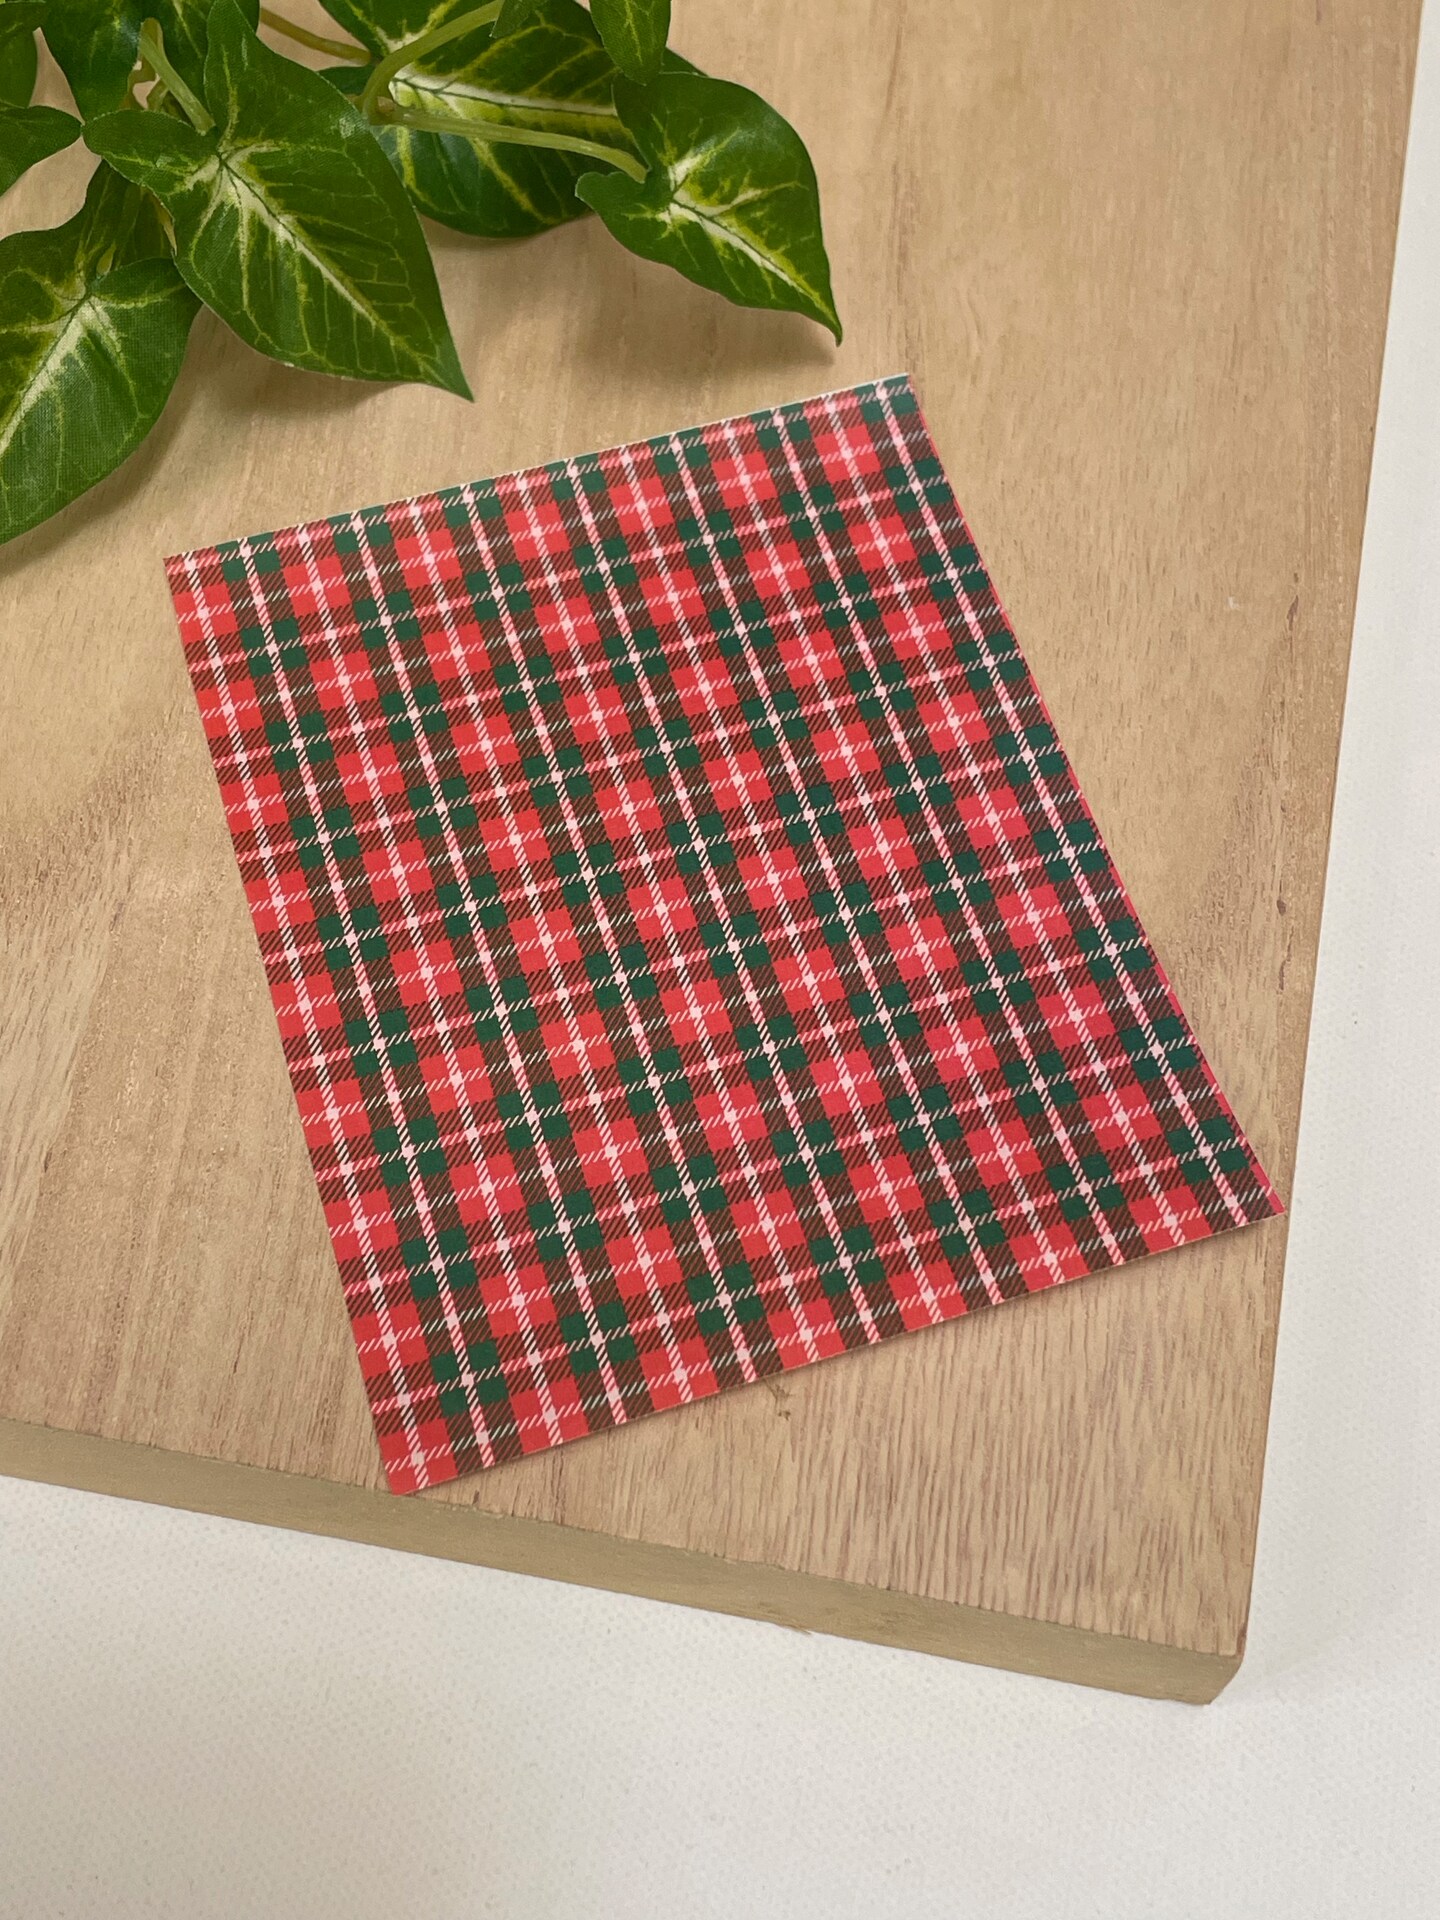 Red Plaid Polymer Clay Transfer Paper Clay Image Transfer Sheet